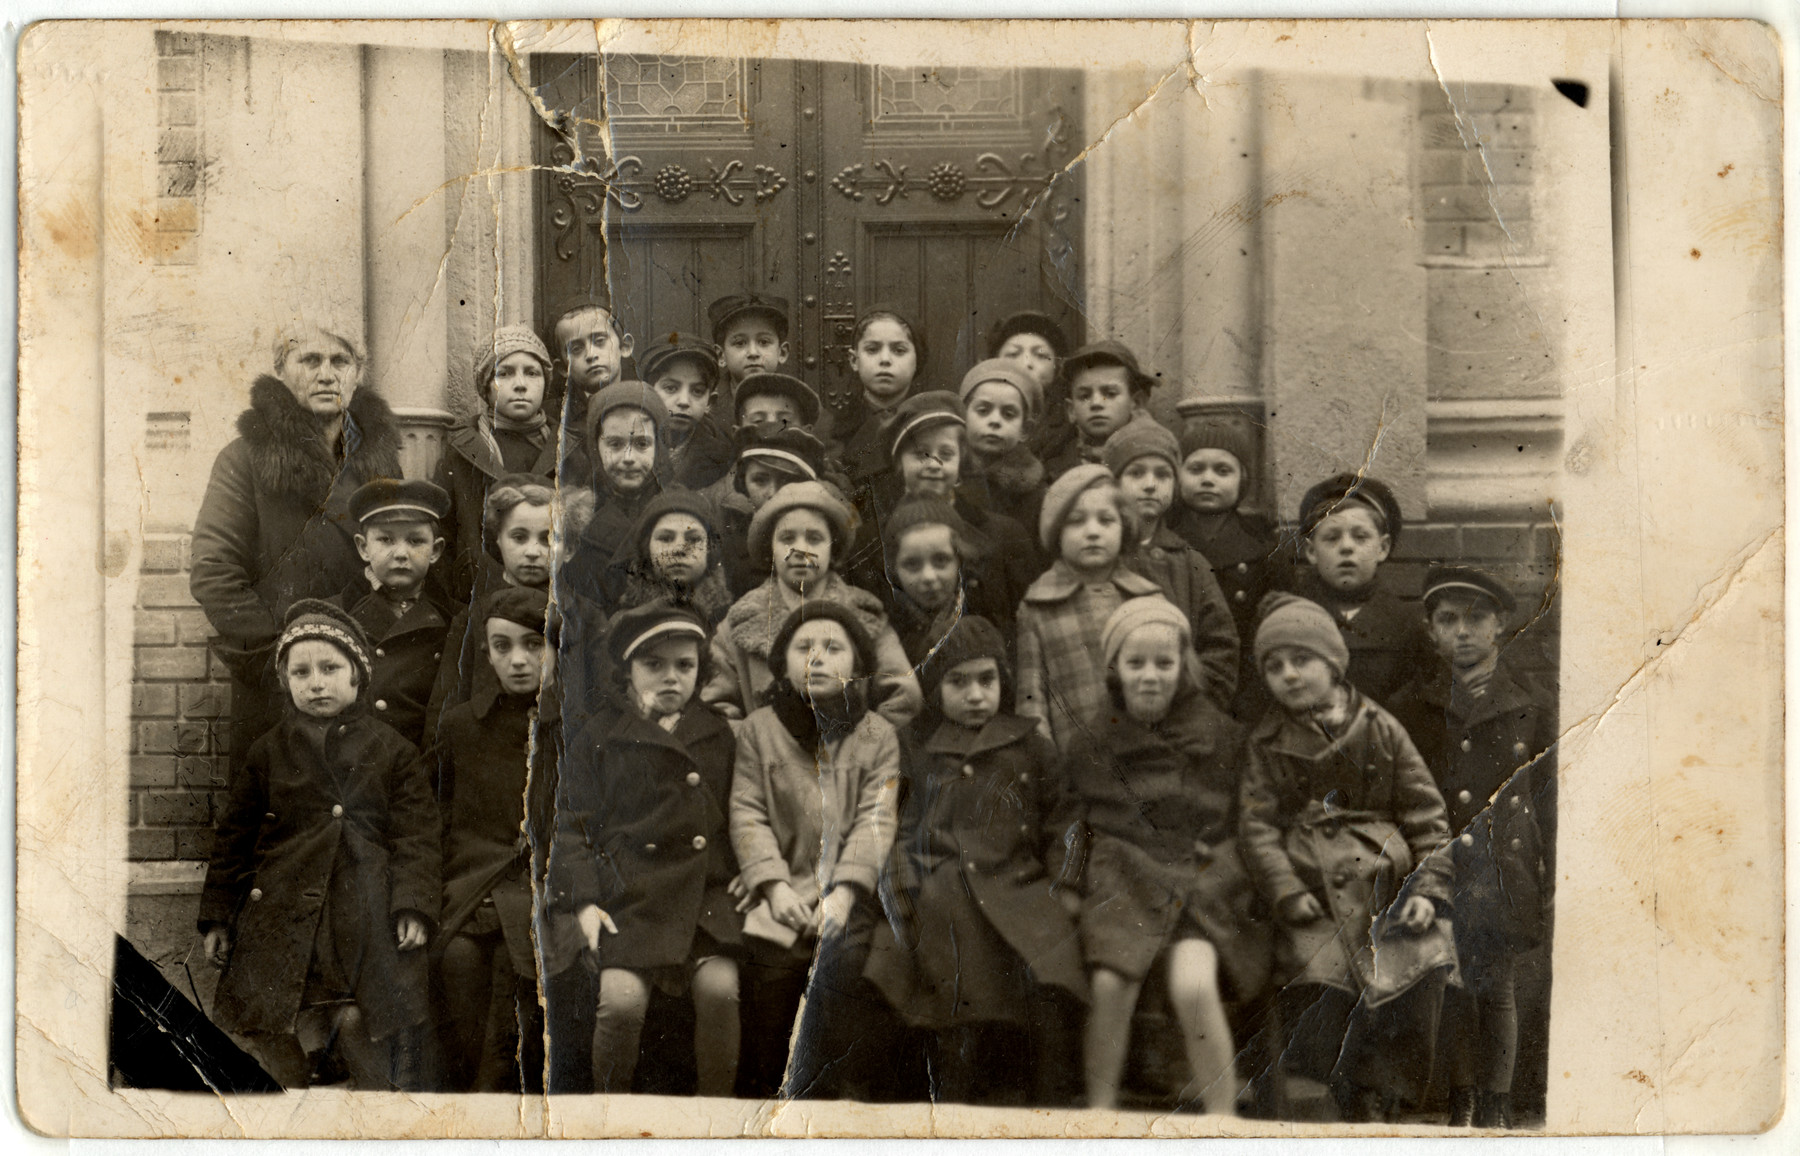 Children in the Jewish day school in Brasov which met in the Neolog synagogue.

GheorgheJozsef (the donor) is in the back center.  Joan Janosi is pictured in the third row.  (He later became a philosopher and member of the Romanian Academy.)